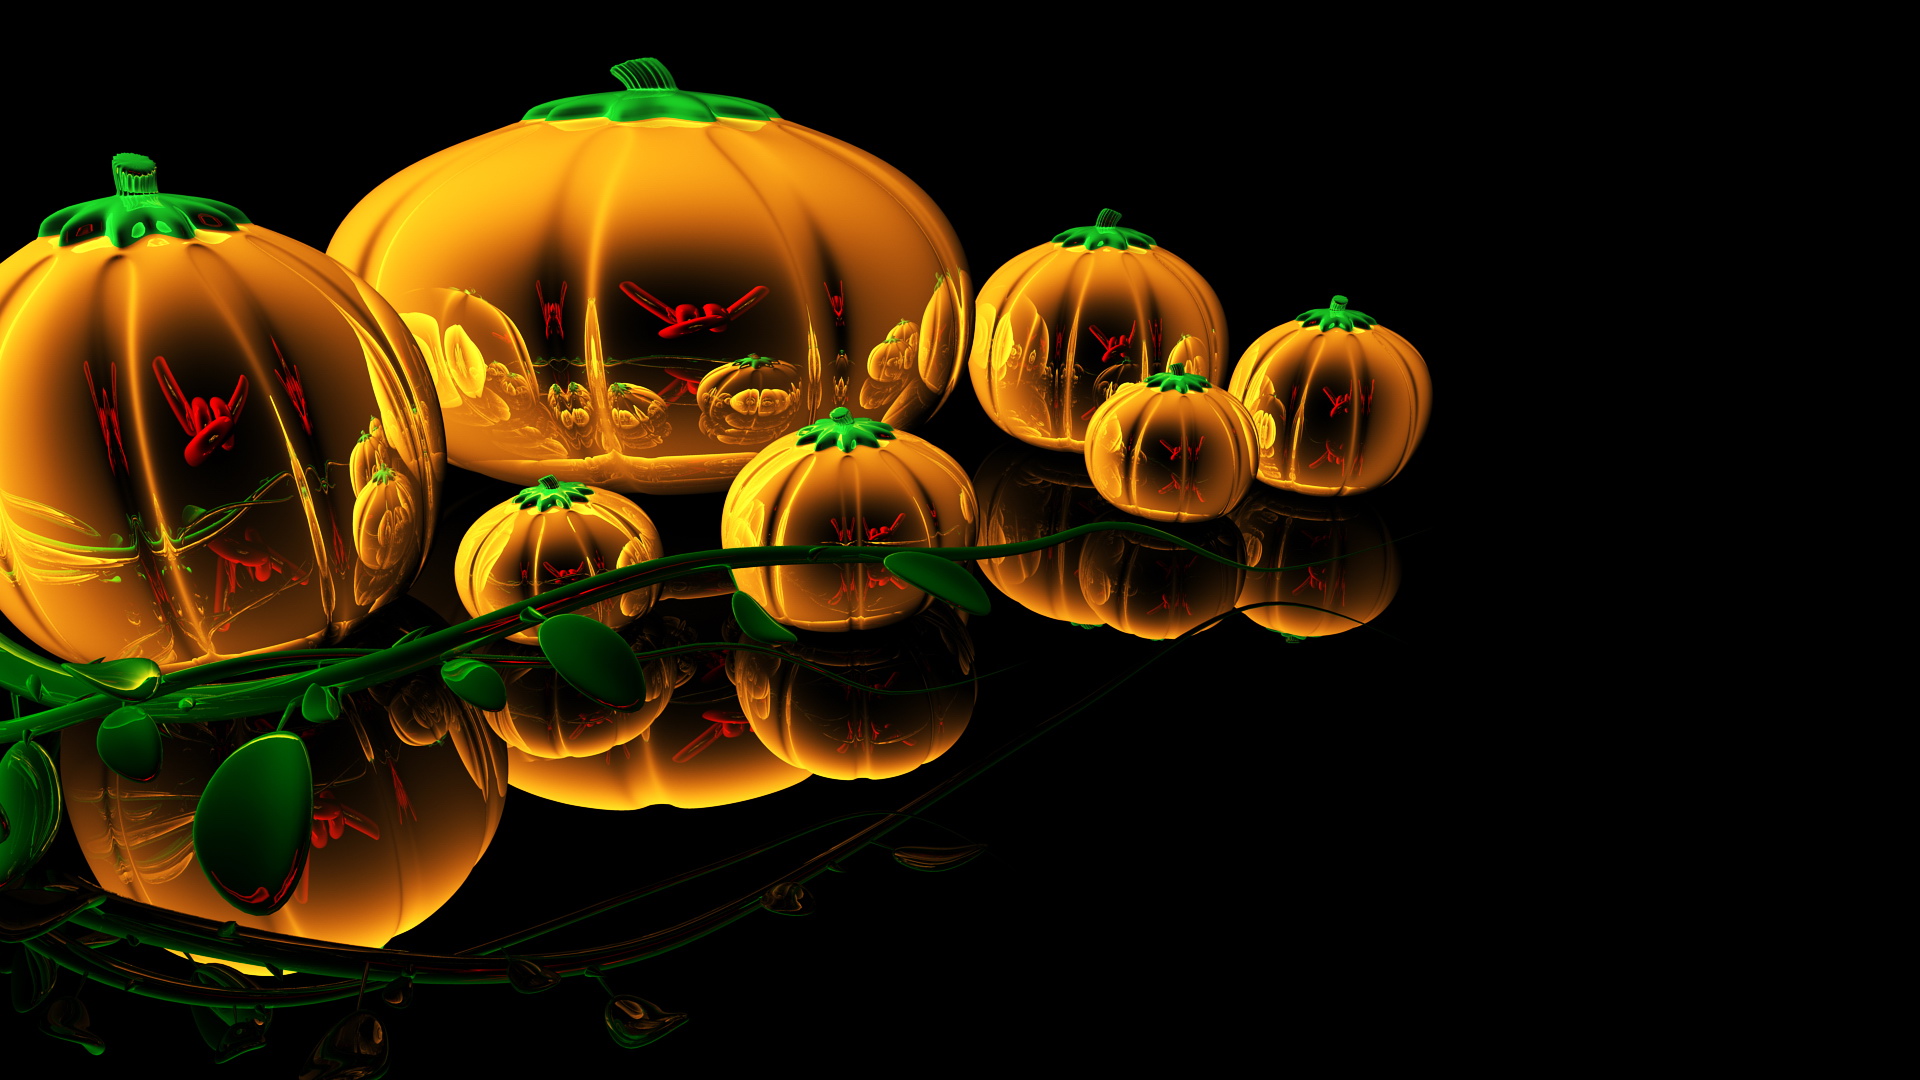 Check this out our new Halloween 3D wallpaper